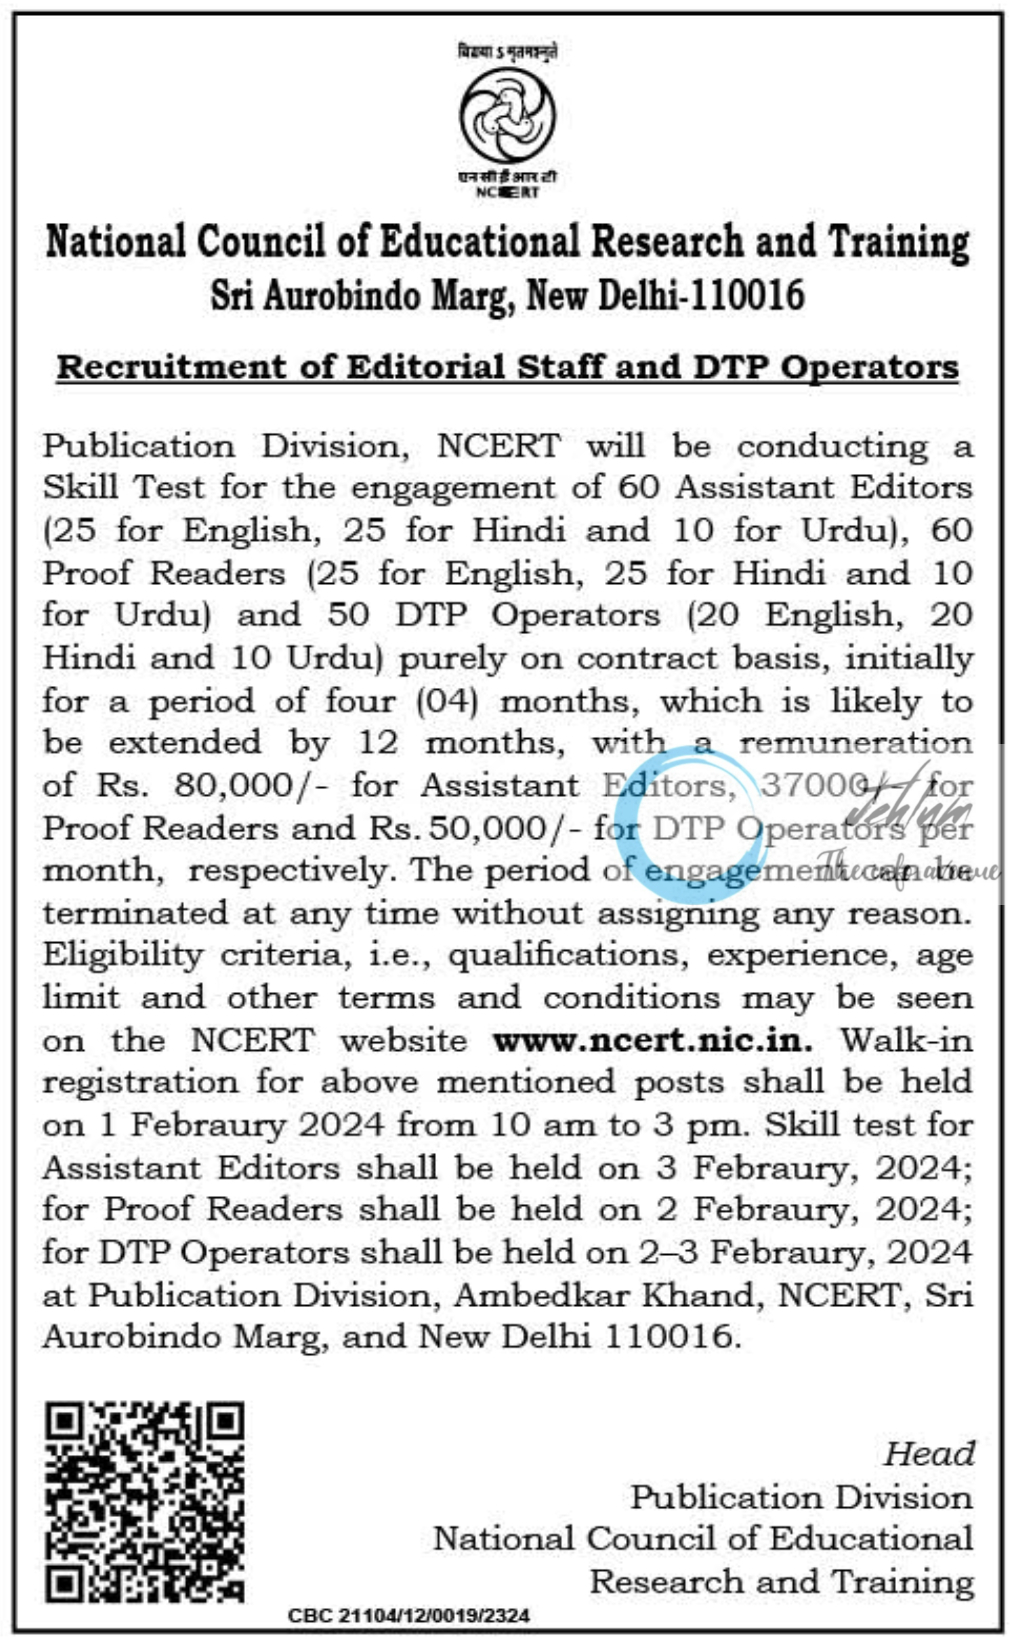 NCERT Recruitment of Editorial Staff and DTP Operators 2024